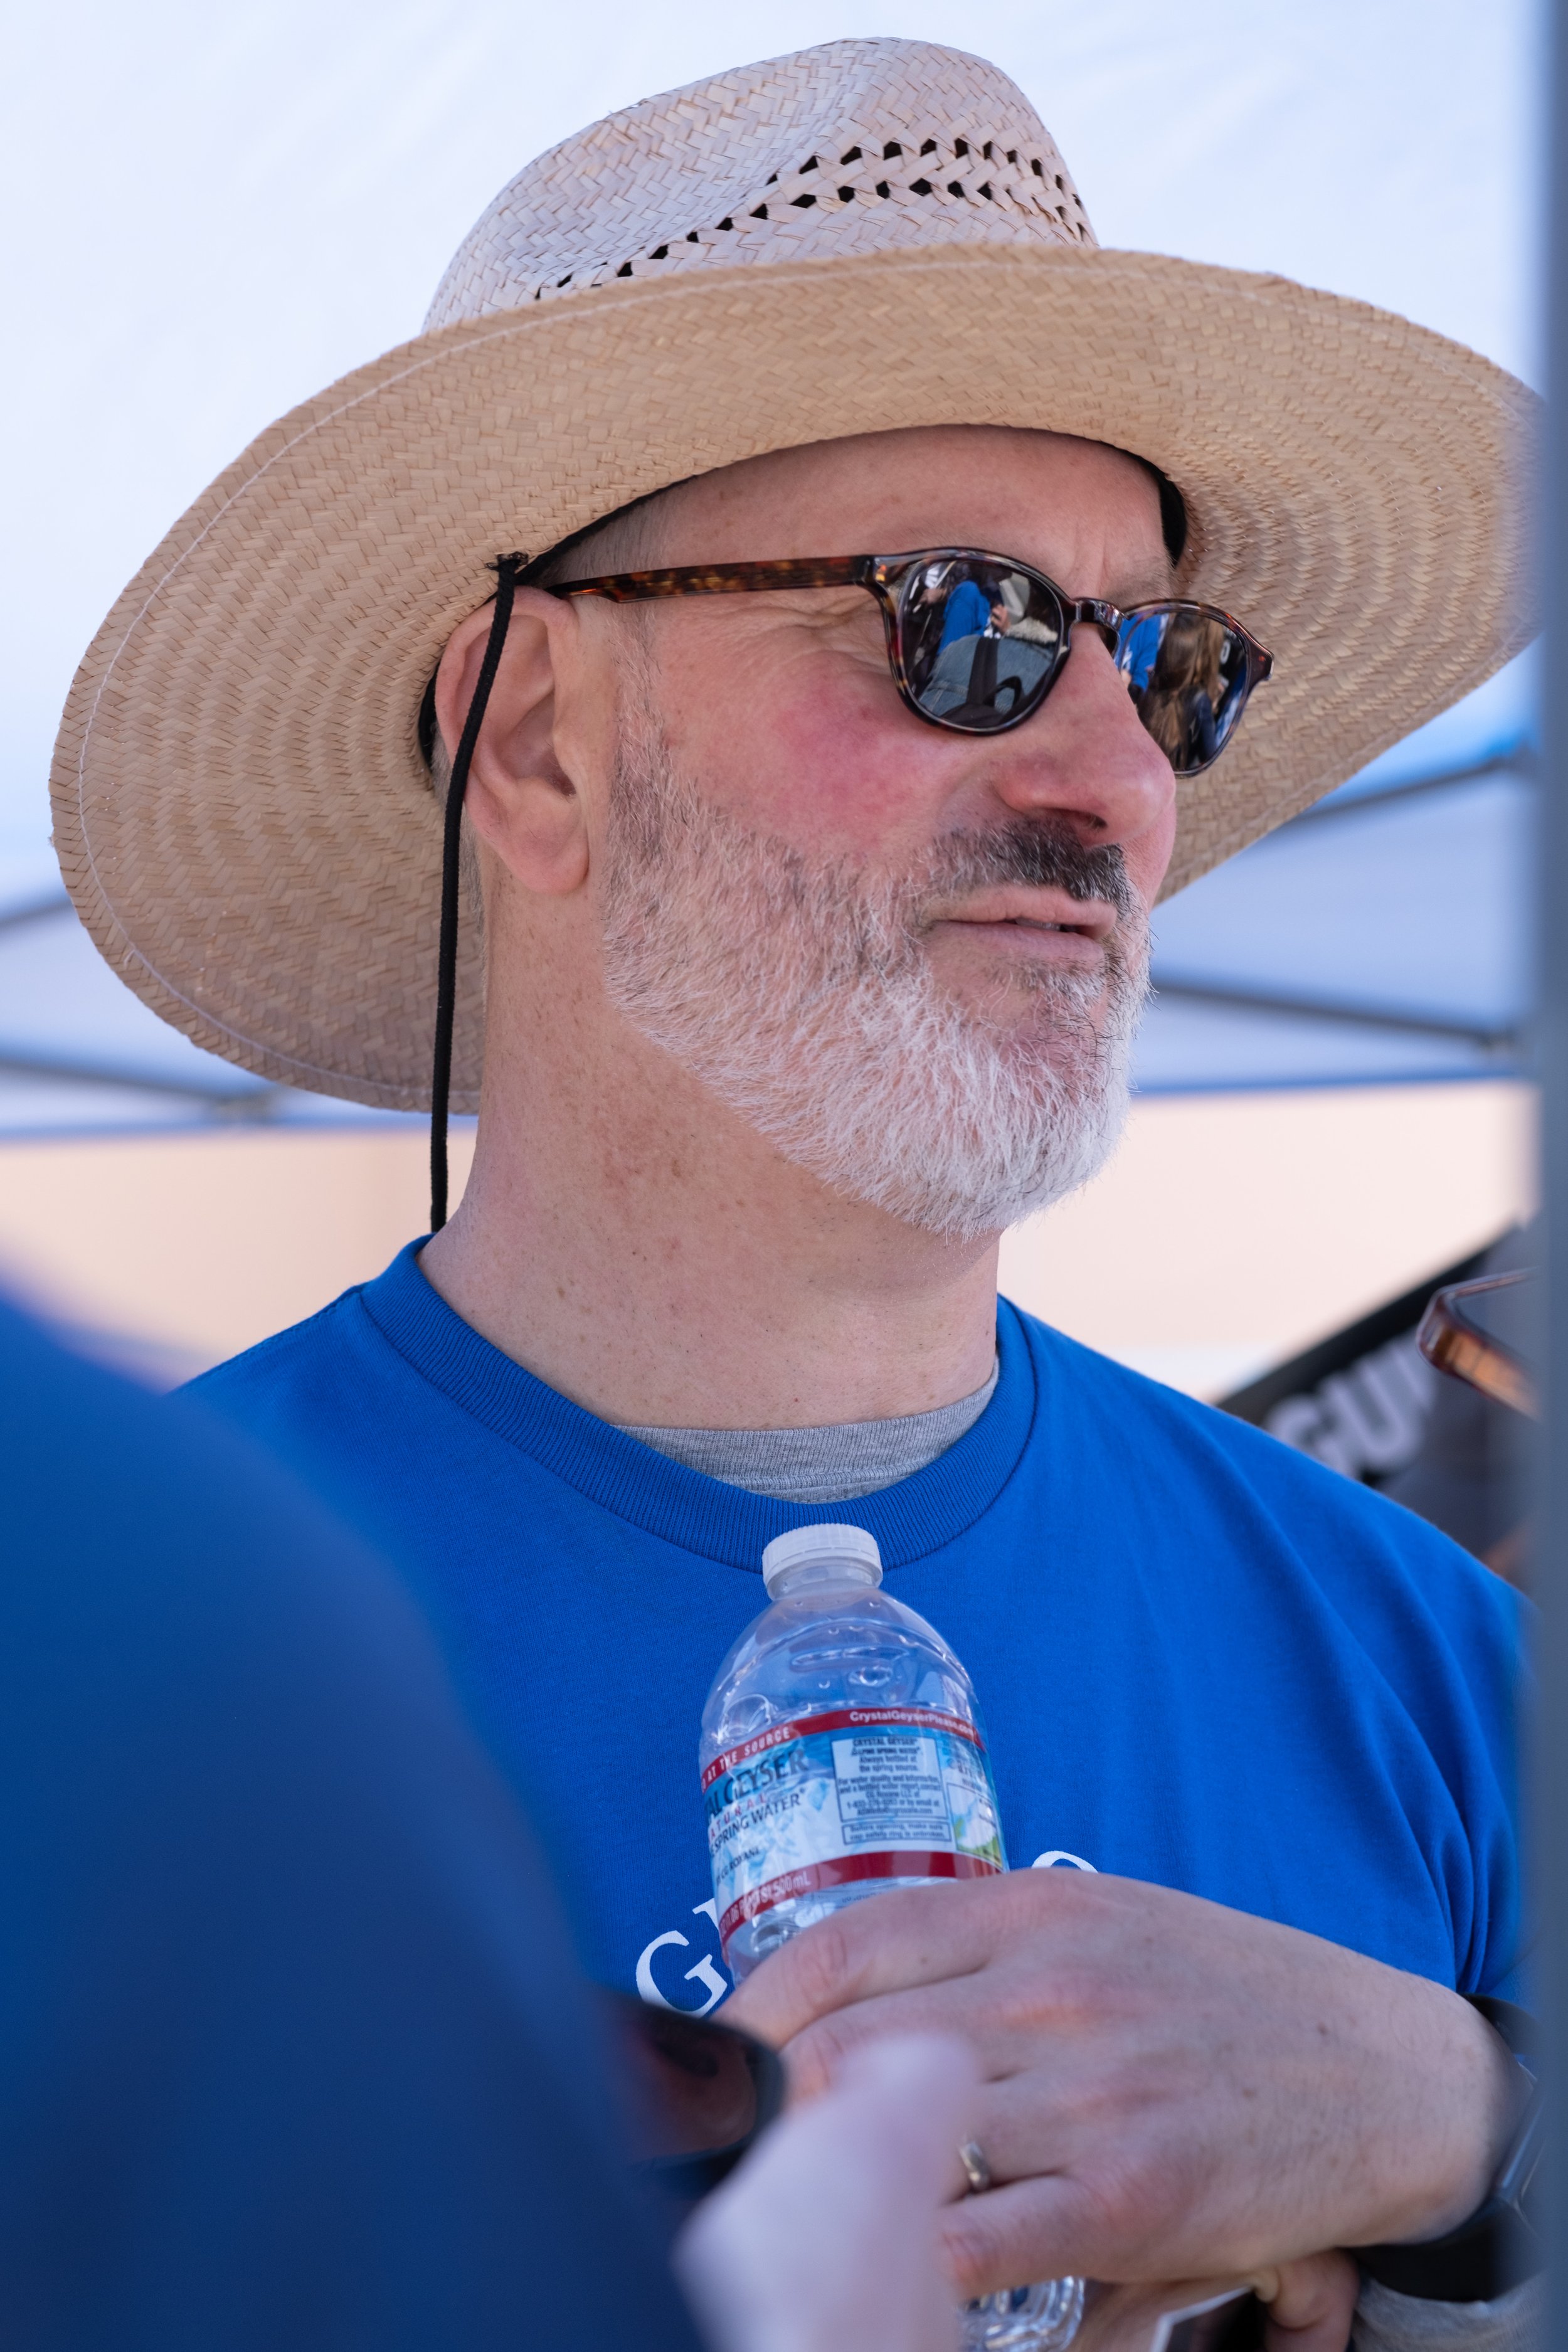  Ted Cohen, a writer and member of the Writers Guild of America (WGA), participates in the protests supporting the WGA strike in front of Fox Studios on Pico Blvd in Los Angeles, Calif. on Tuesday May 2nd, 2023. He states, "With the advent of streami